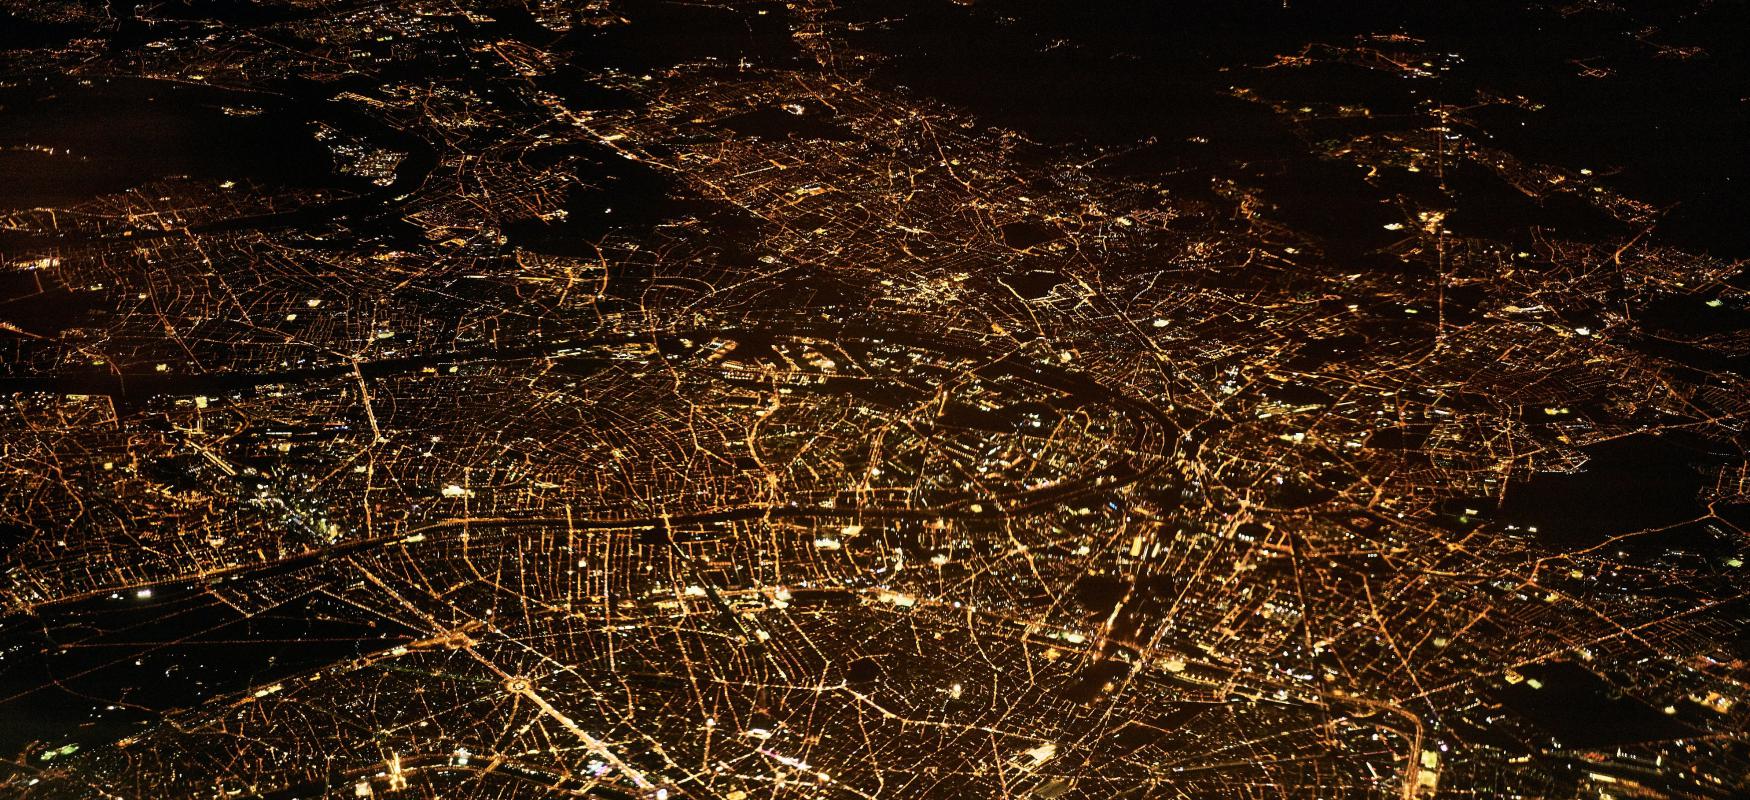 Paris at night seen from the air.